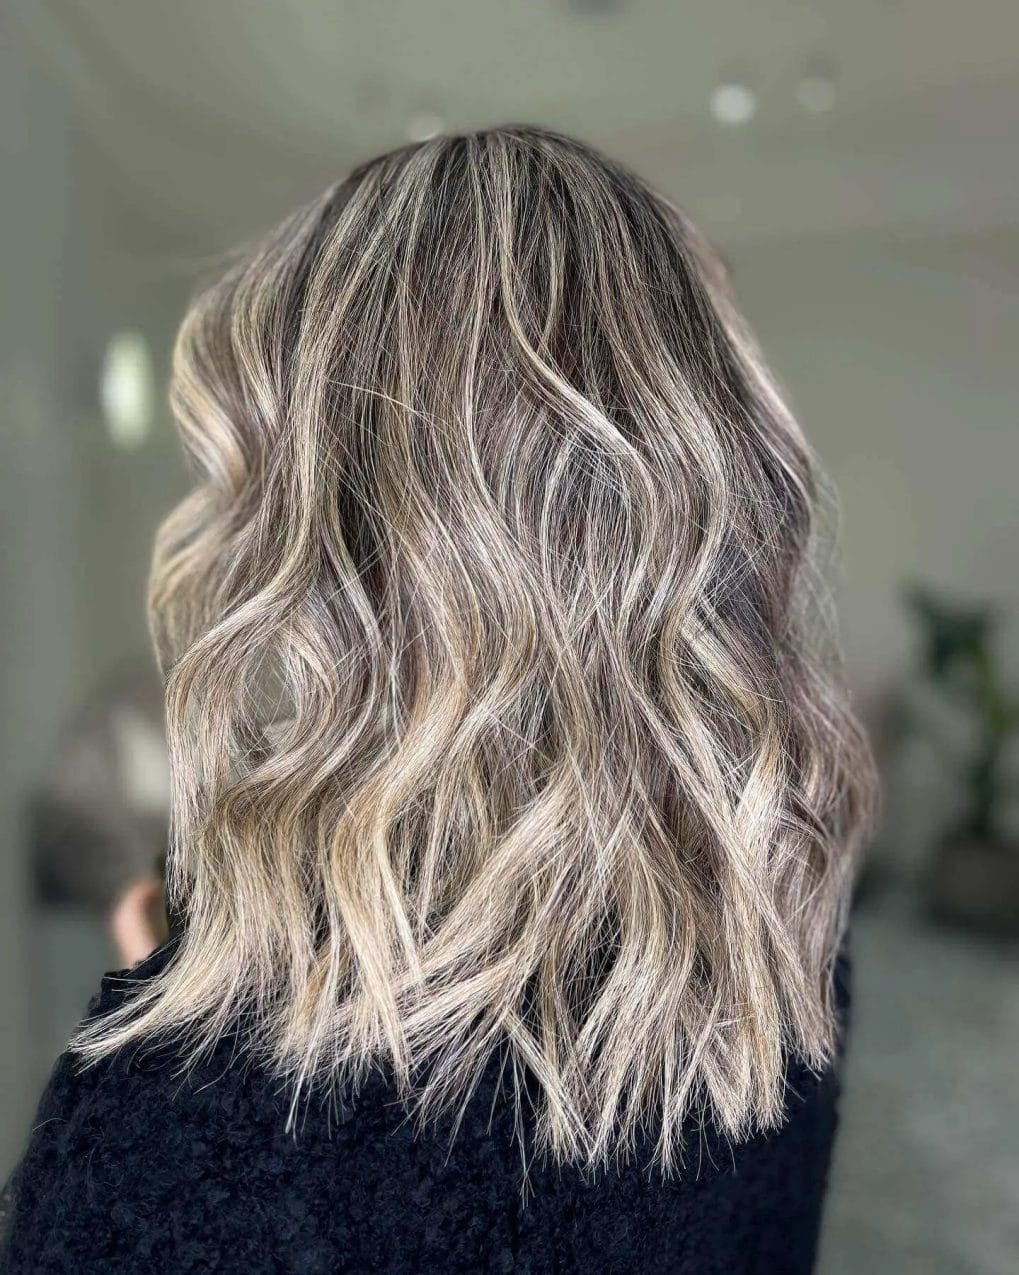 Layered hairstyle, full-bodied with beachy balayage.